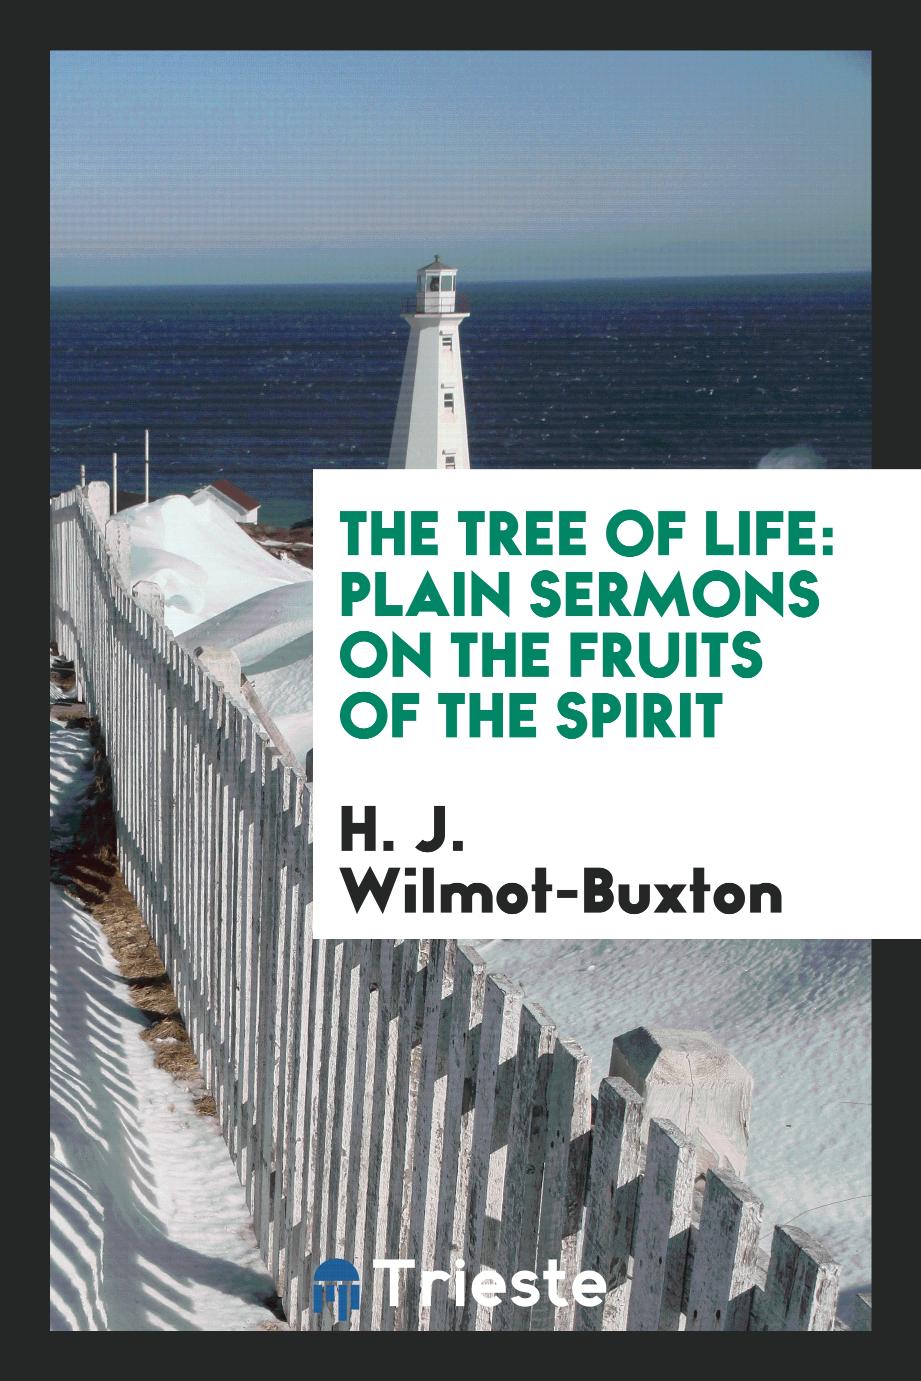 The tree of life: plain sermons on the fruits of the spirit